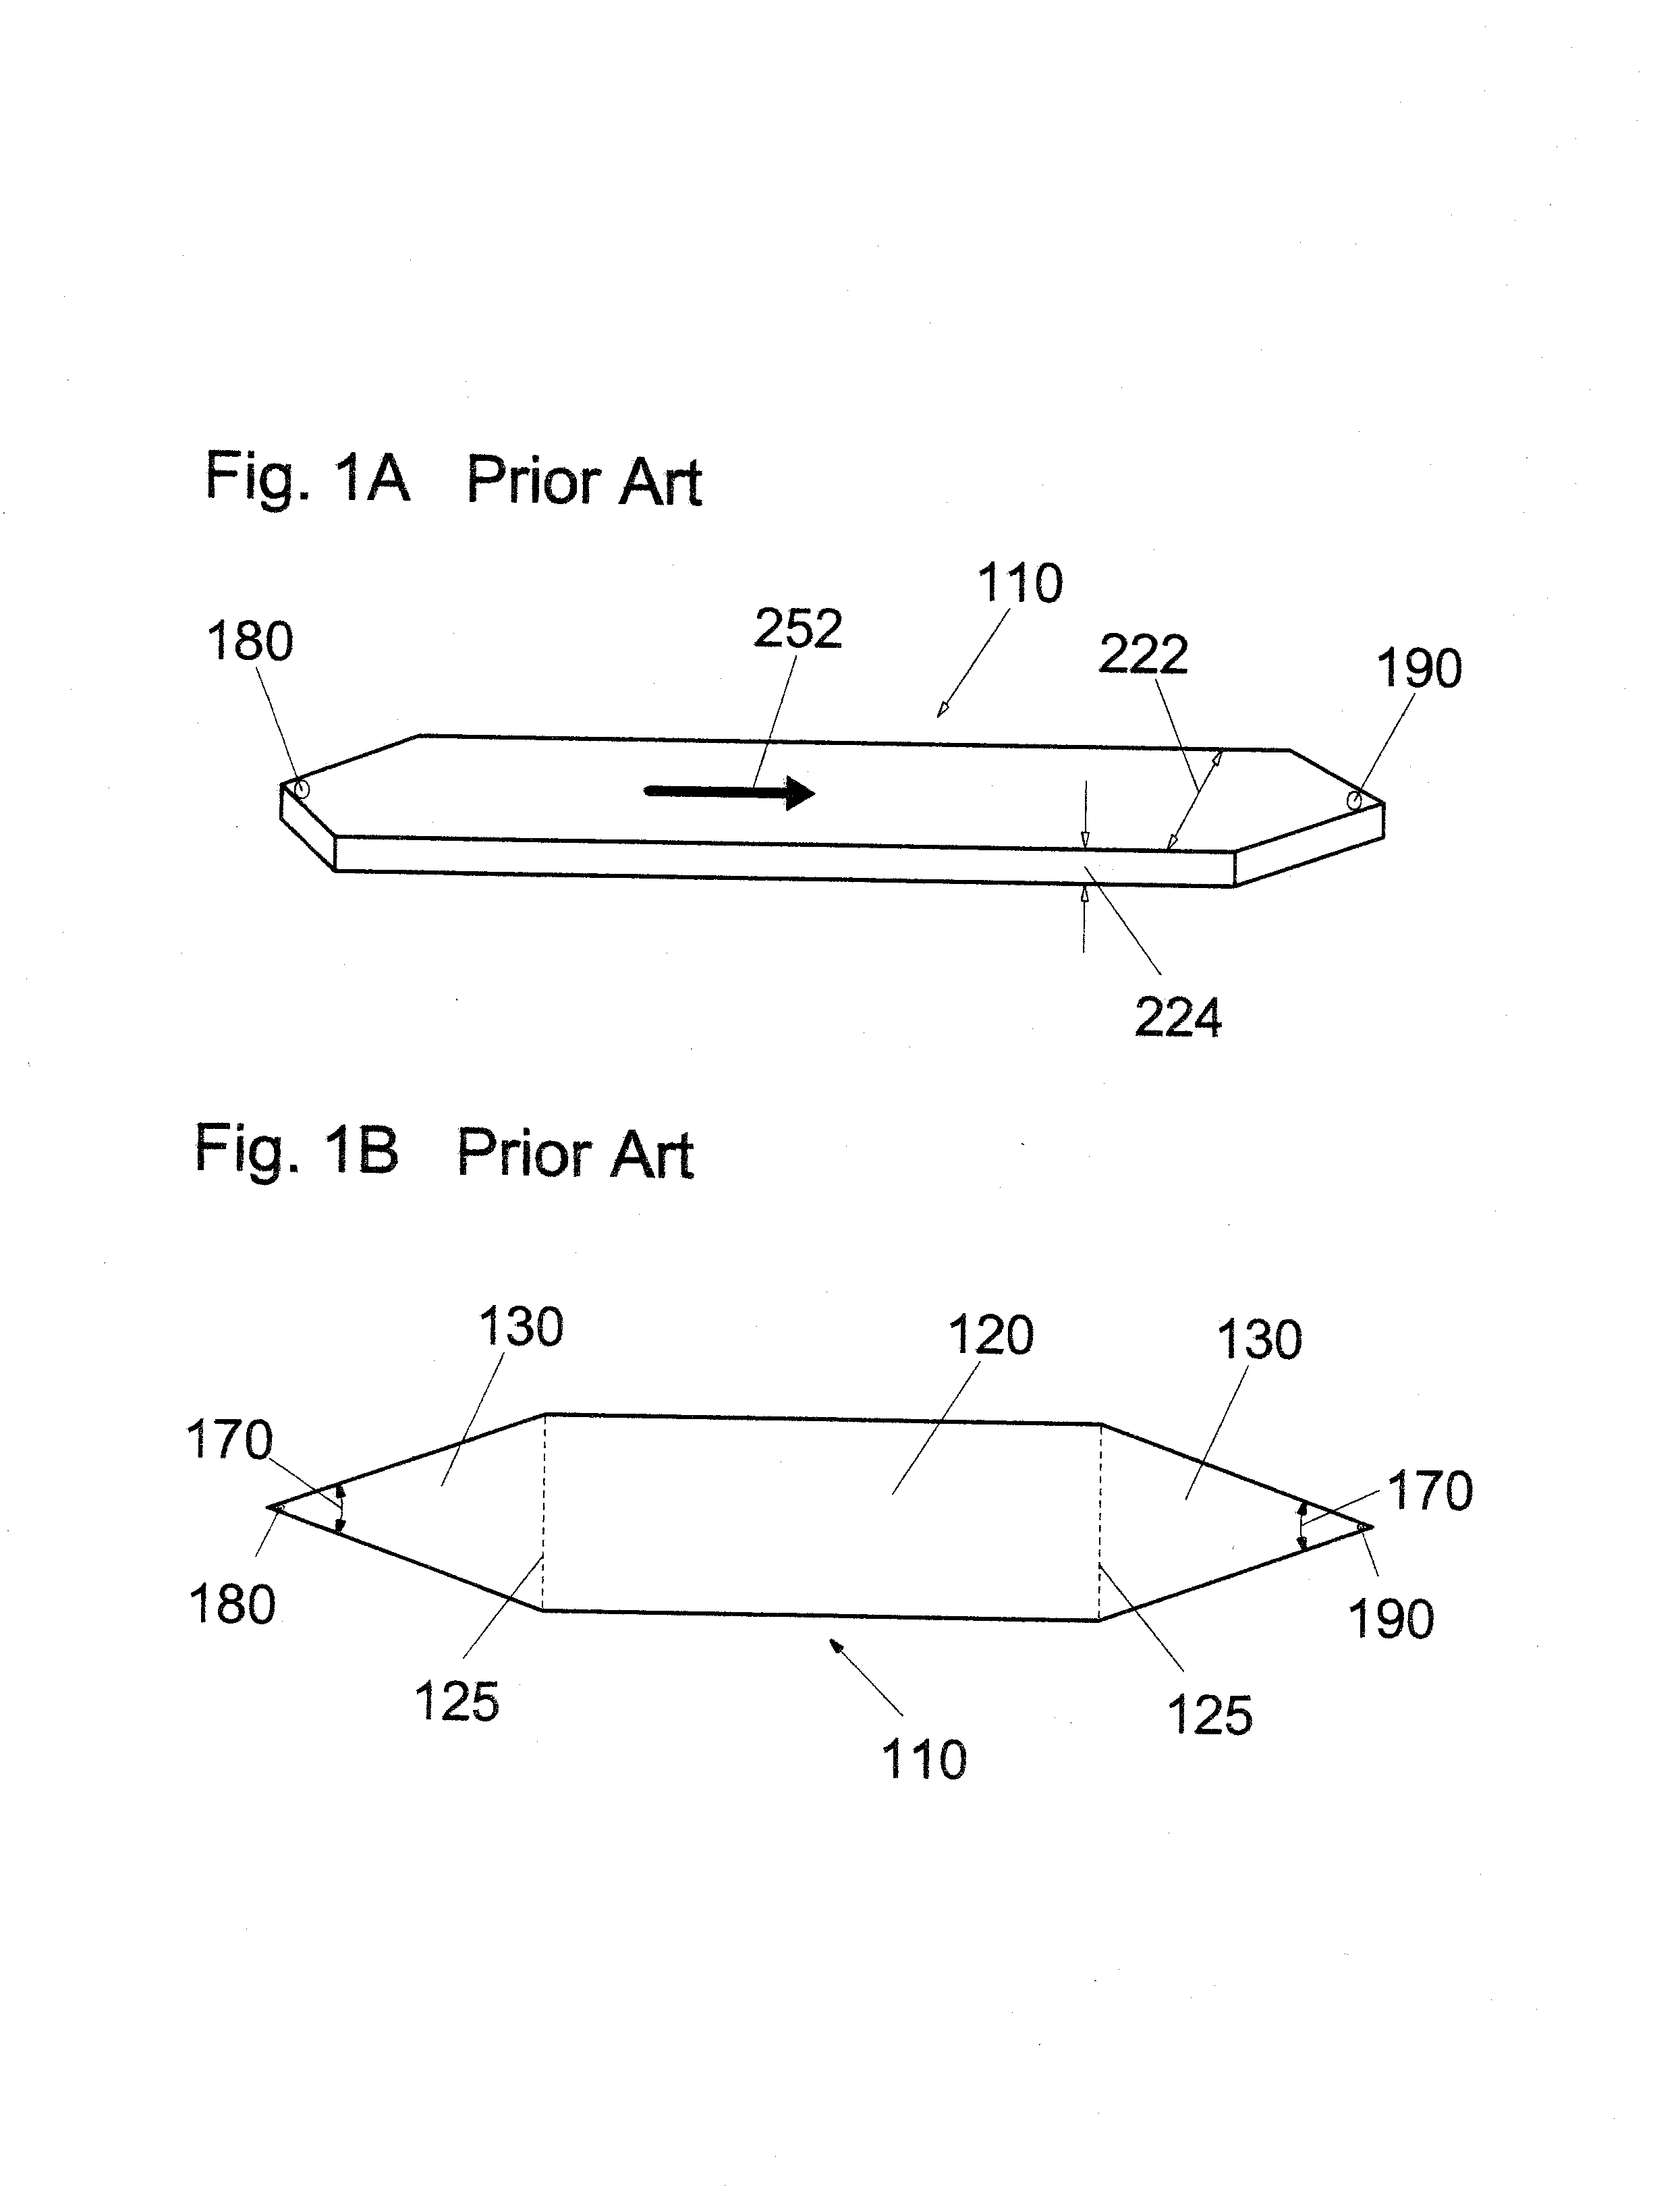 Apparatus and methods for transferring materials between locations possessing different cross-sectional areas with minimal band spreading and dispersion due to unequal path-lengths